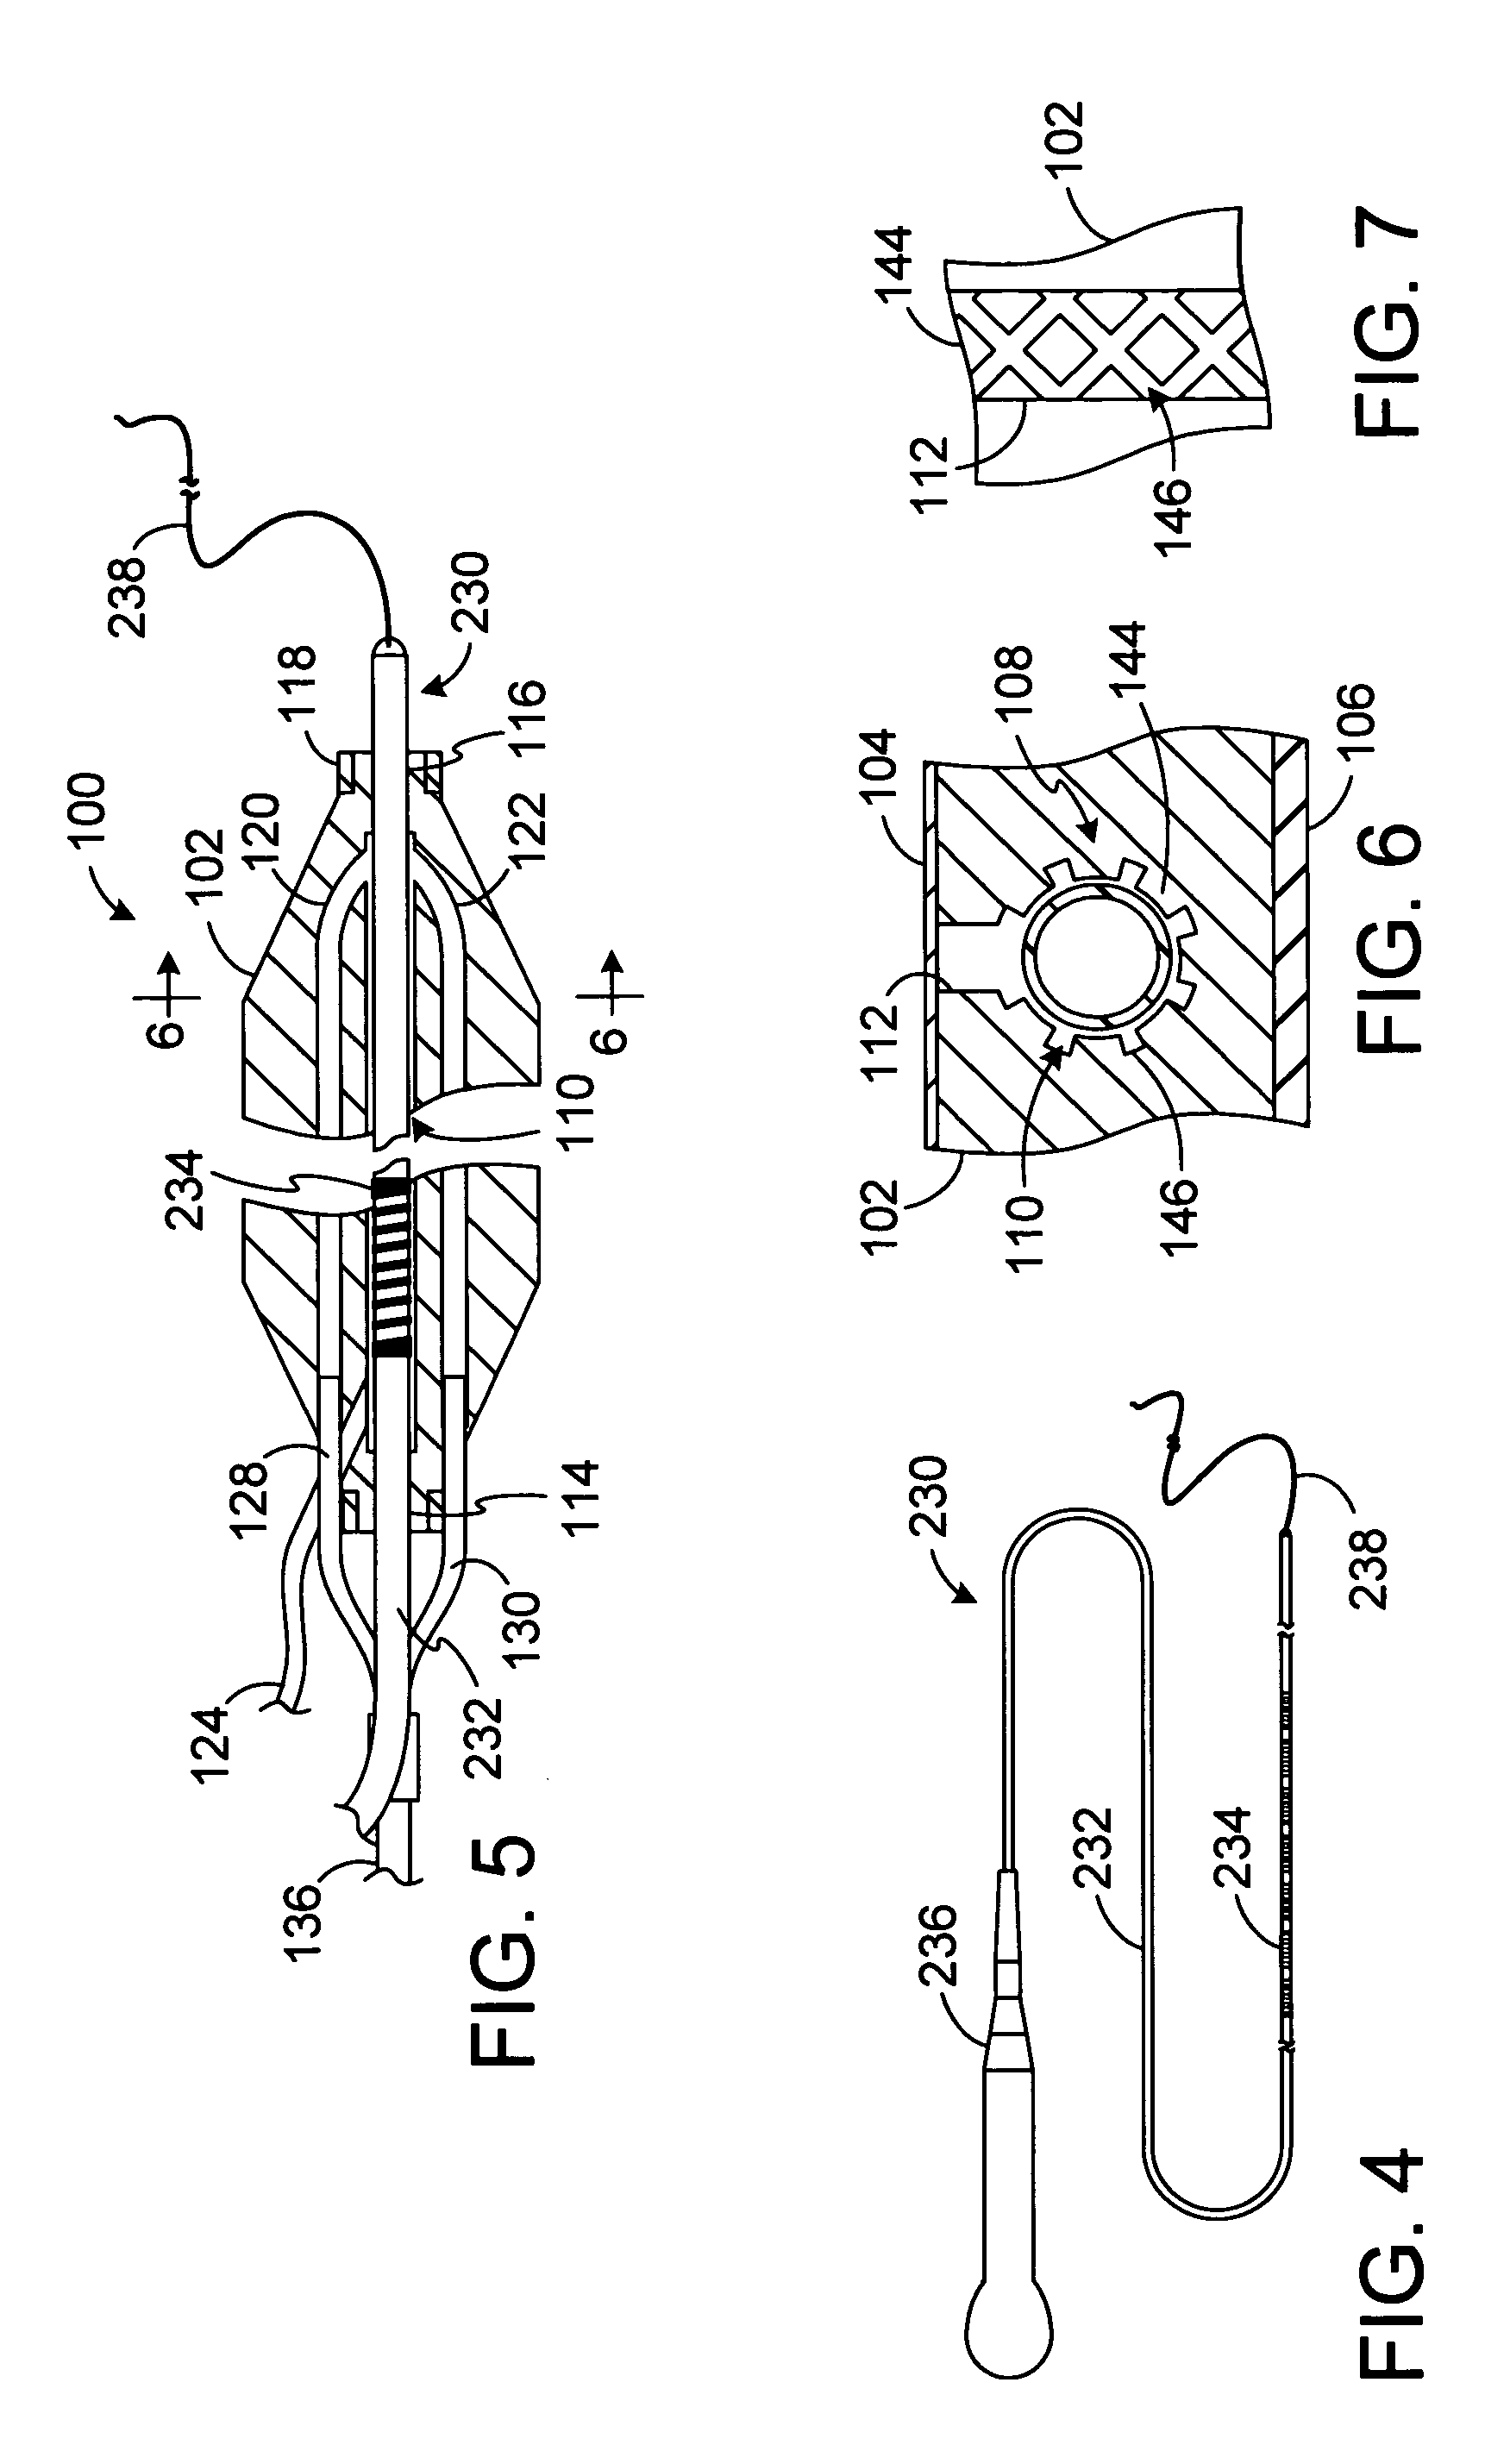 Clamp based lesion formation apparatus and methods configured to protect non-target tissue